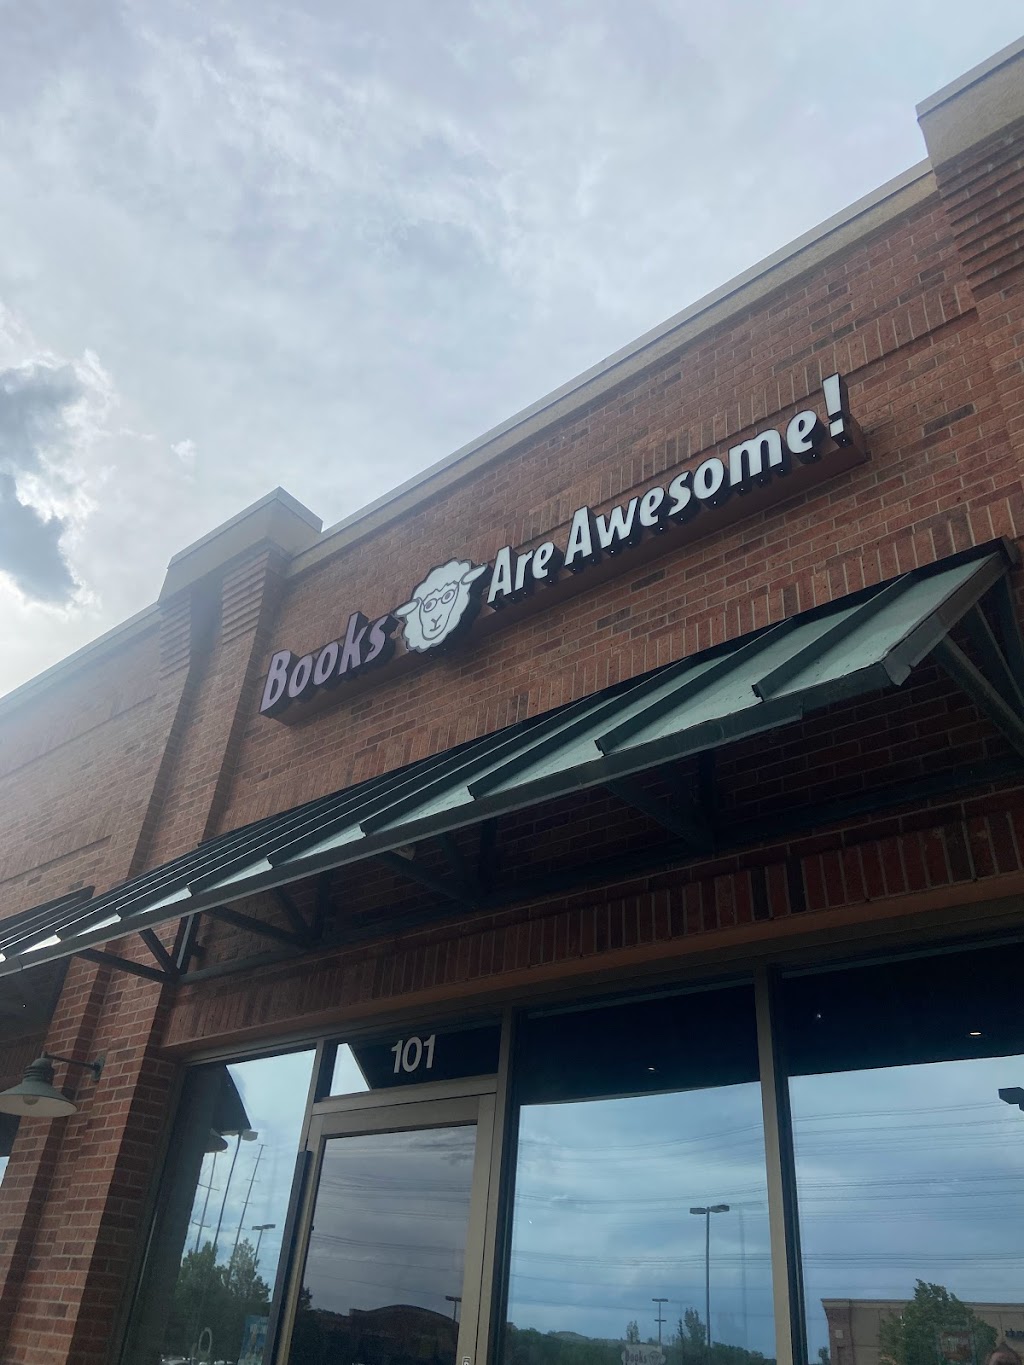 Books are Awesome | 11211 Dransfeldt Rd #101, Parker, CO 80134 | Phone: (303) 357-8240